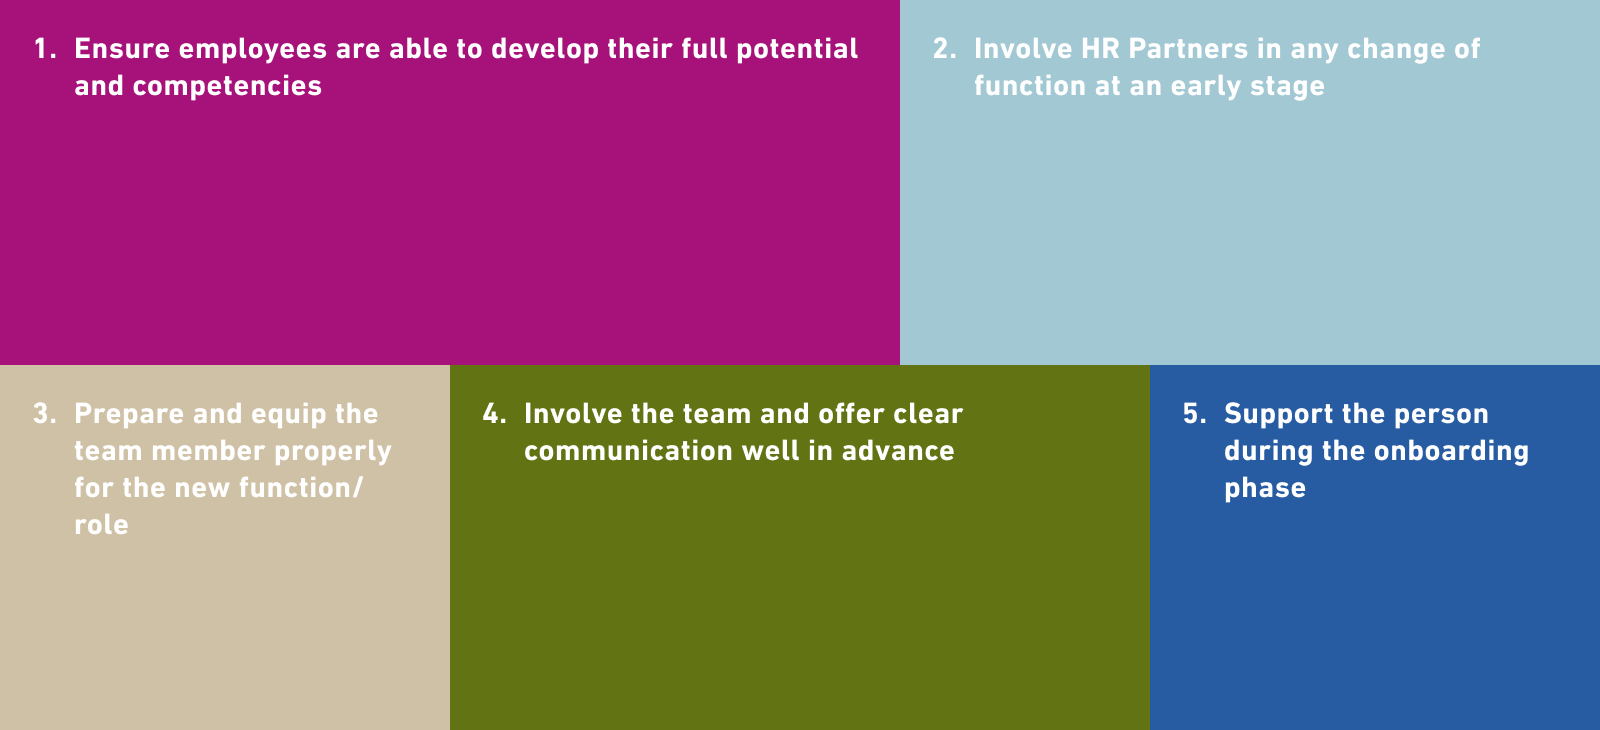 1. Ensure employees are able to develop their full potential and competencies 2. Involve HR Partners in any change of function at an early stage 3. Prepare and equip the team member properly for the new function/role 4. Involve the team and offer clear communication well in advance 5. Support the person during the onboarding phase